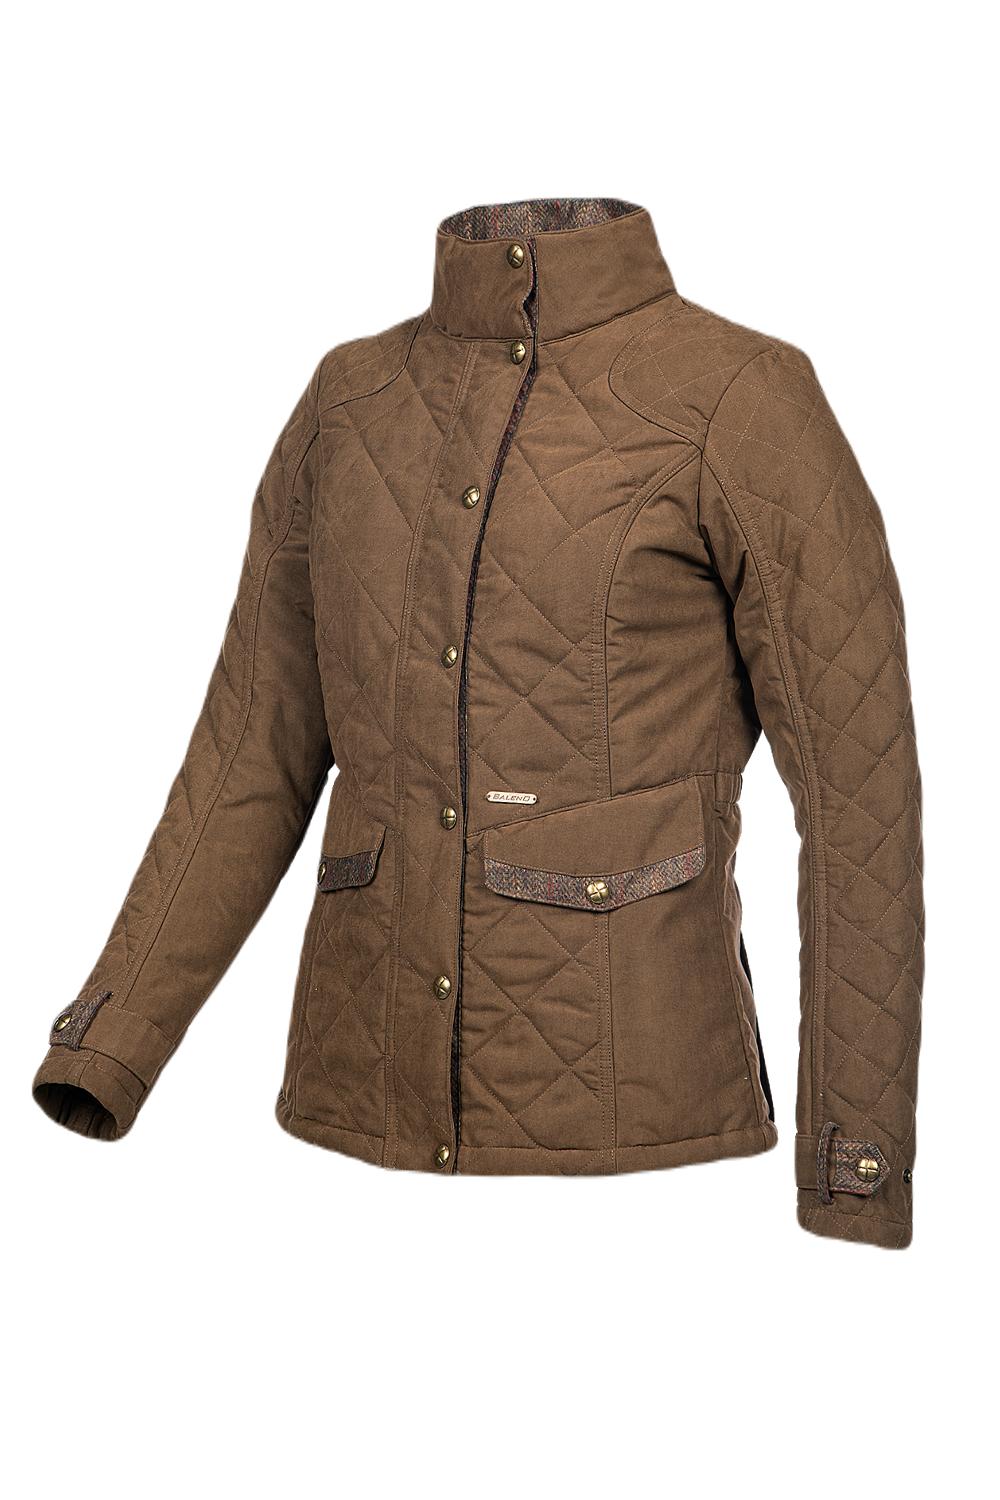 Baleno Halifax Ladies Quilted Jacket In Earth Brown 